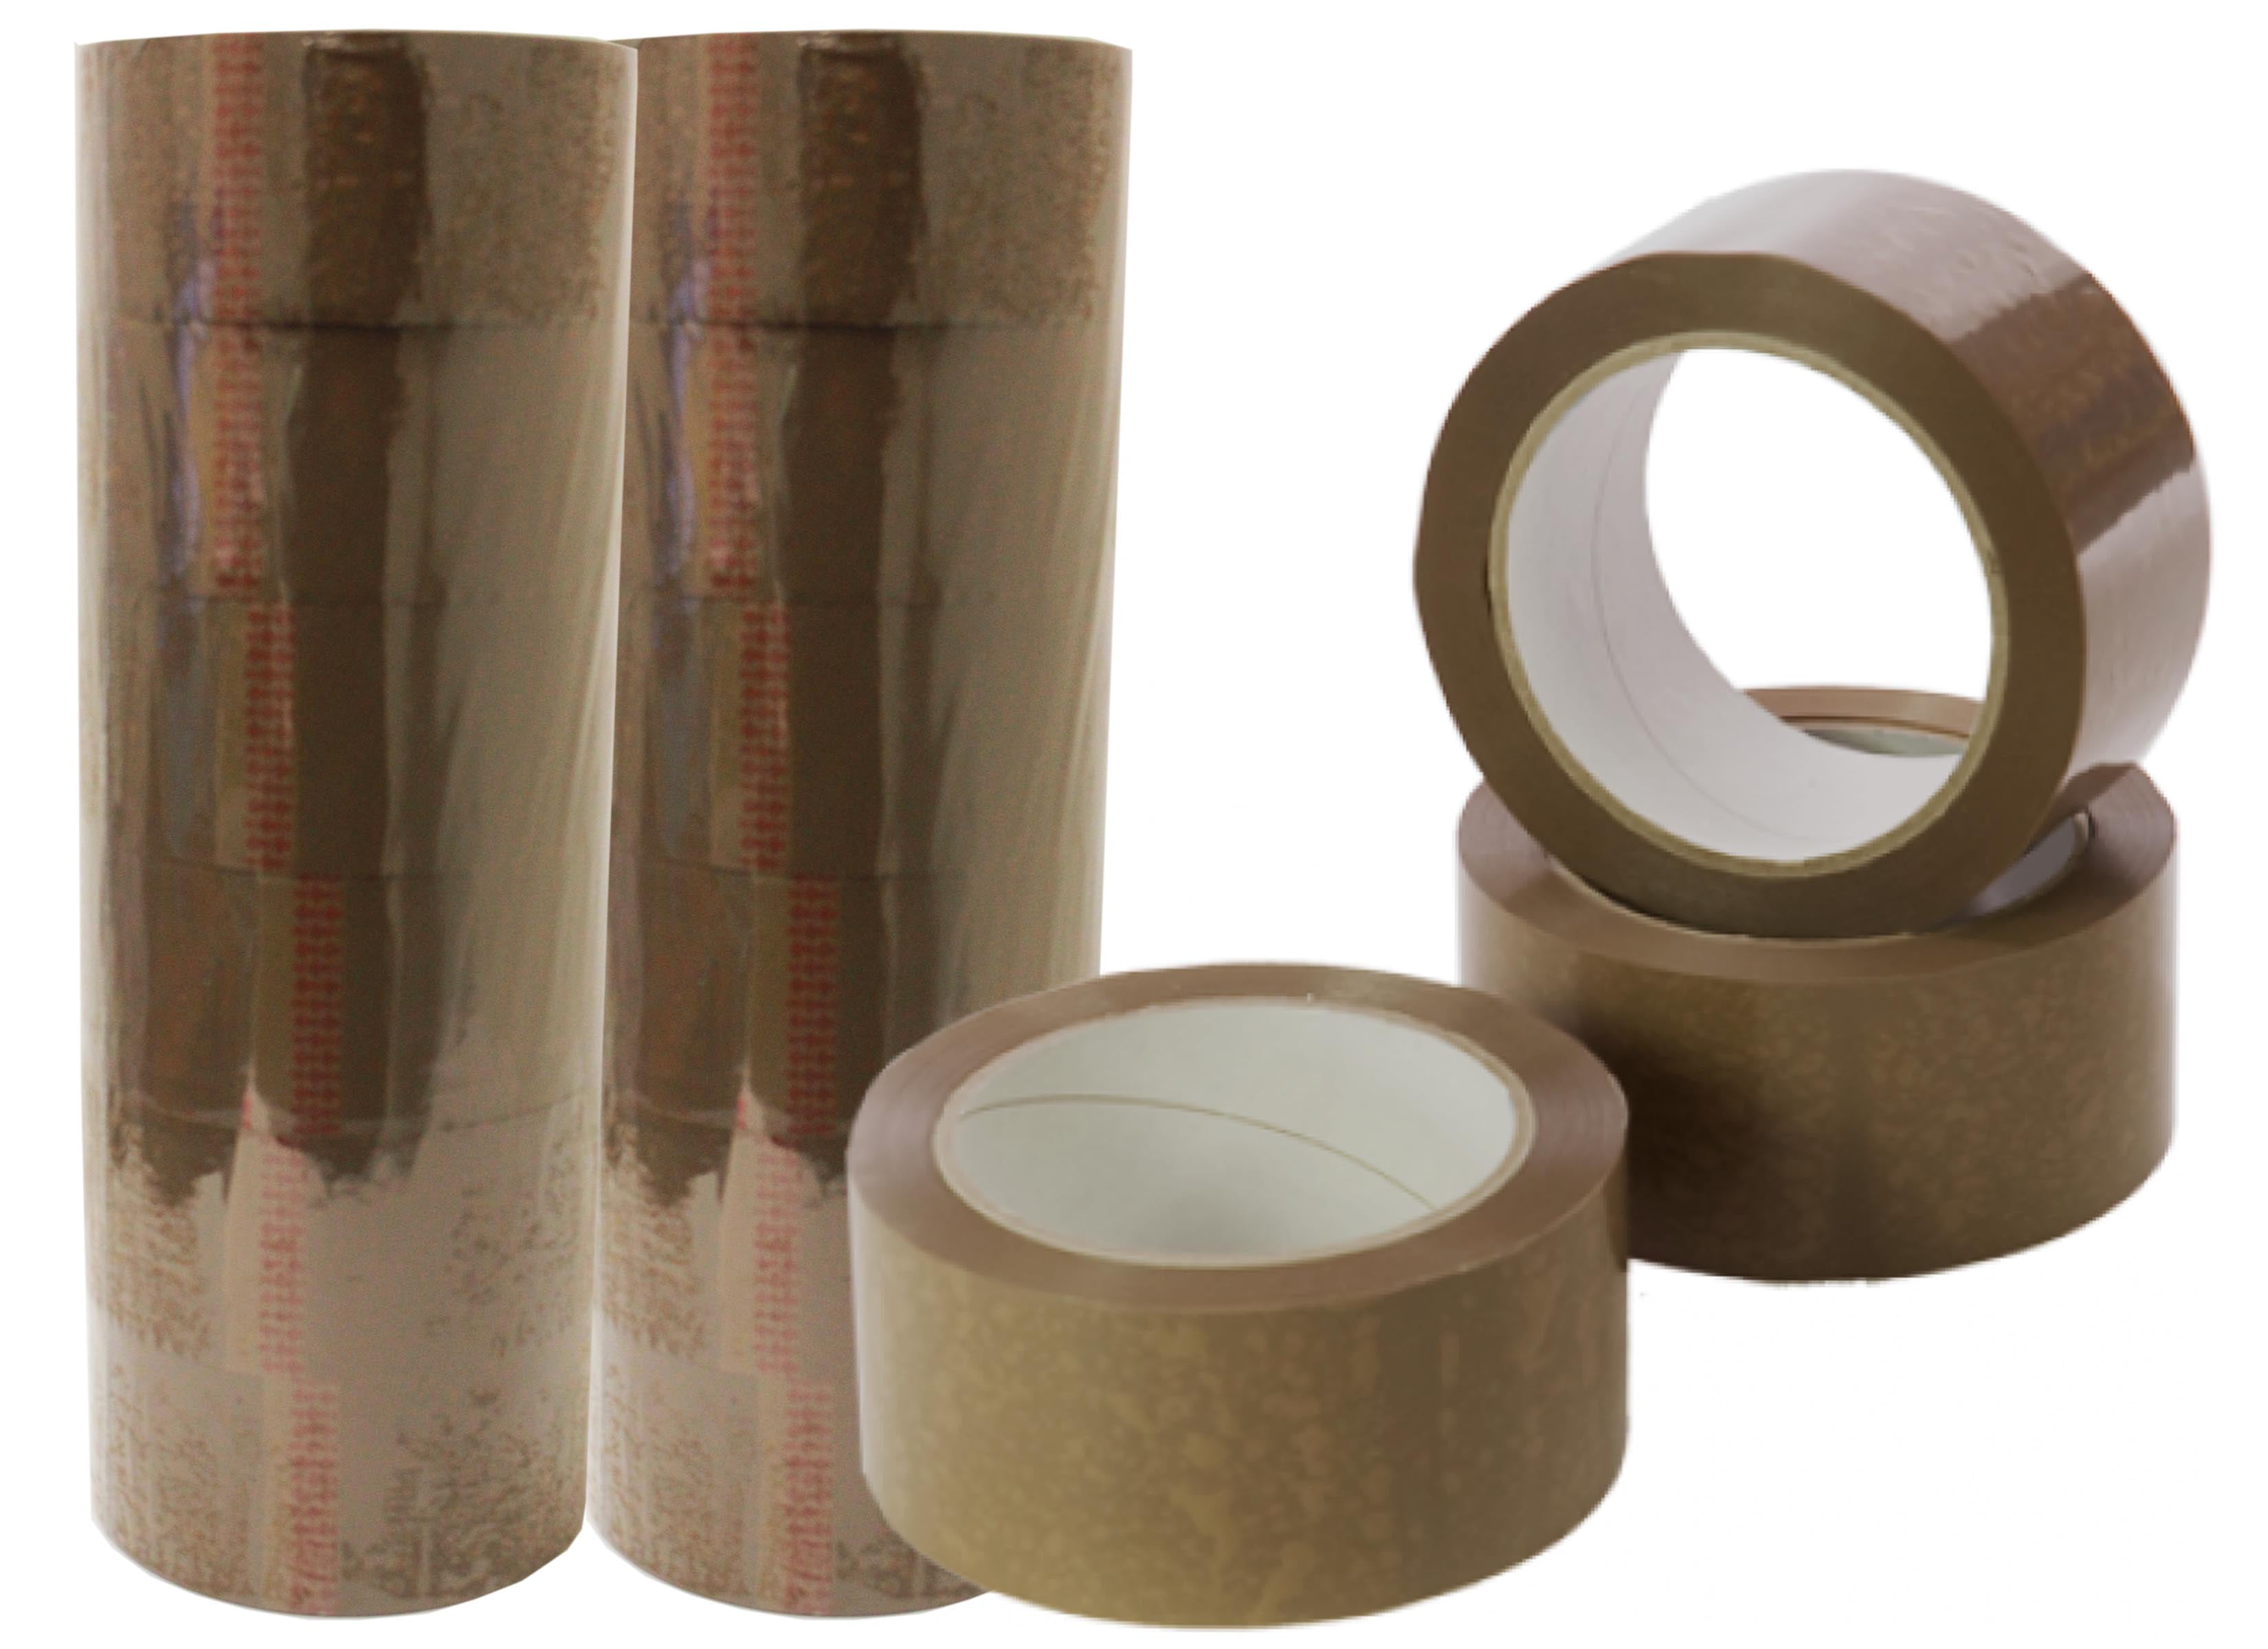 2 110 yds Brown Heavy Duty Packaging Tape 72PK Brown Transparent  All-Purpose Glossy Material for Office, School and Home Carton Sealing Tape  for